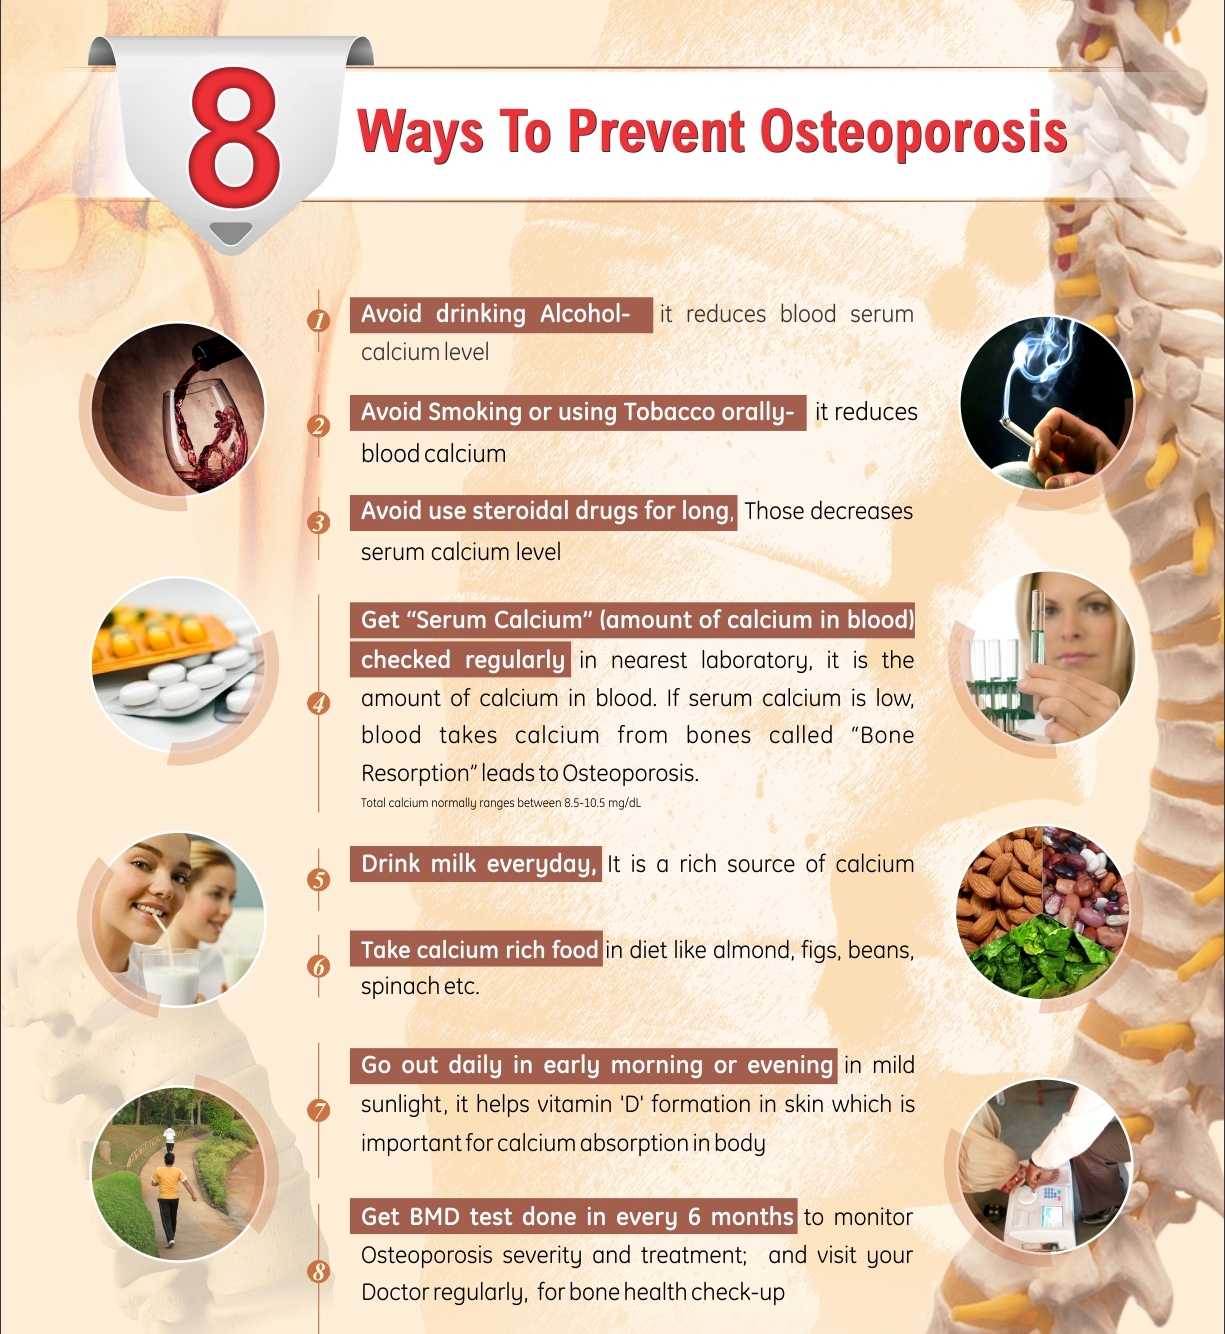 http://www.honeliat.com/prevention-of-osteoporosis/